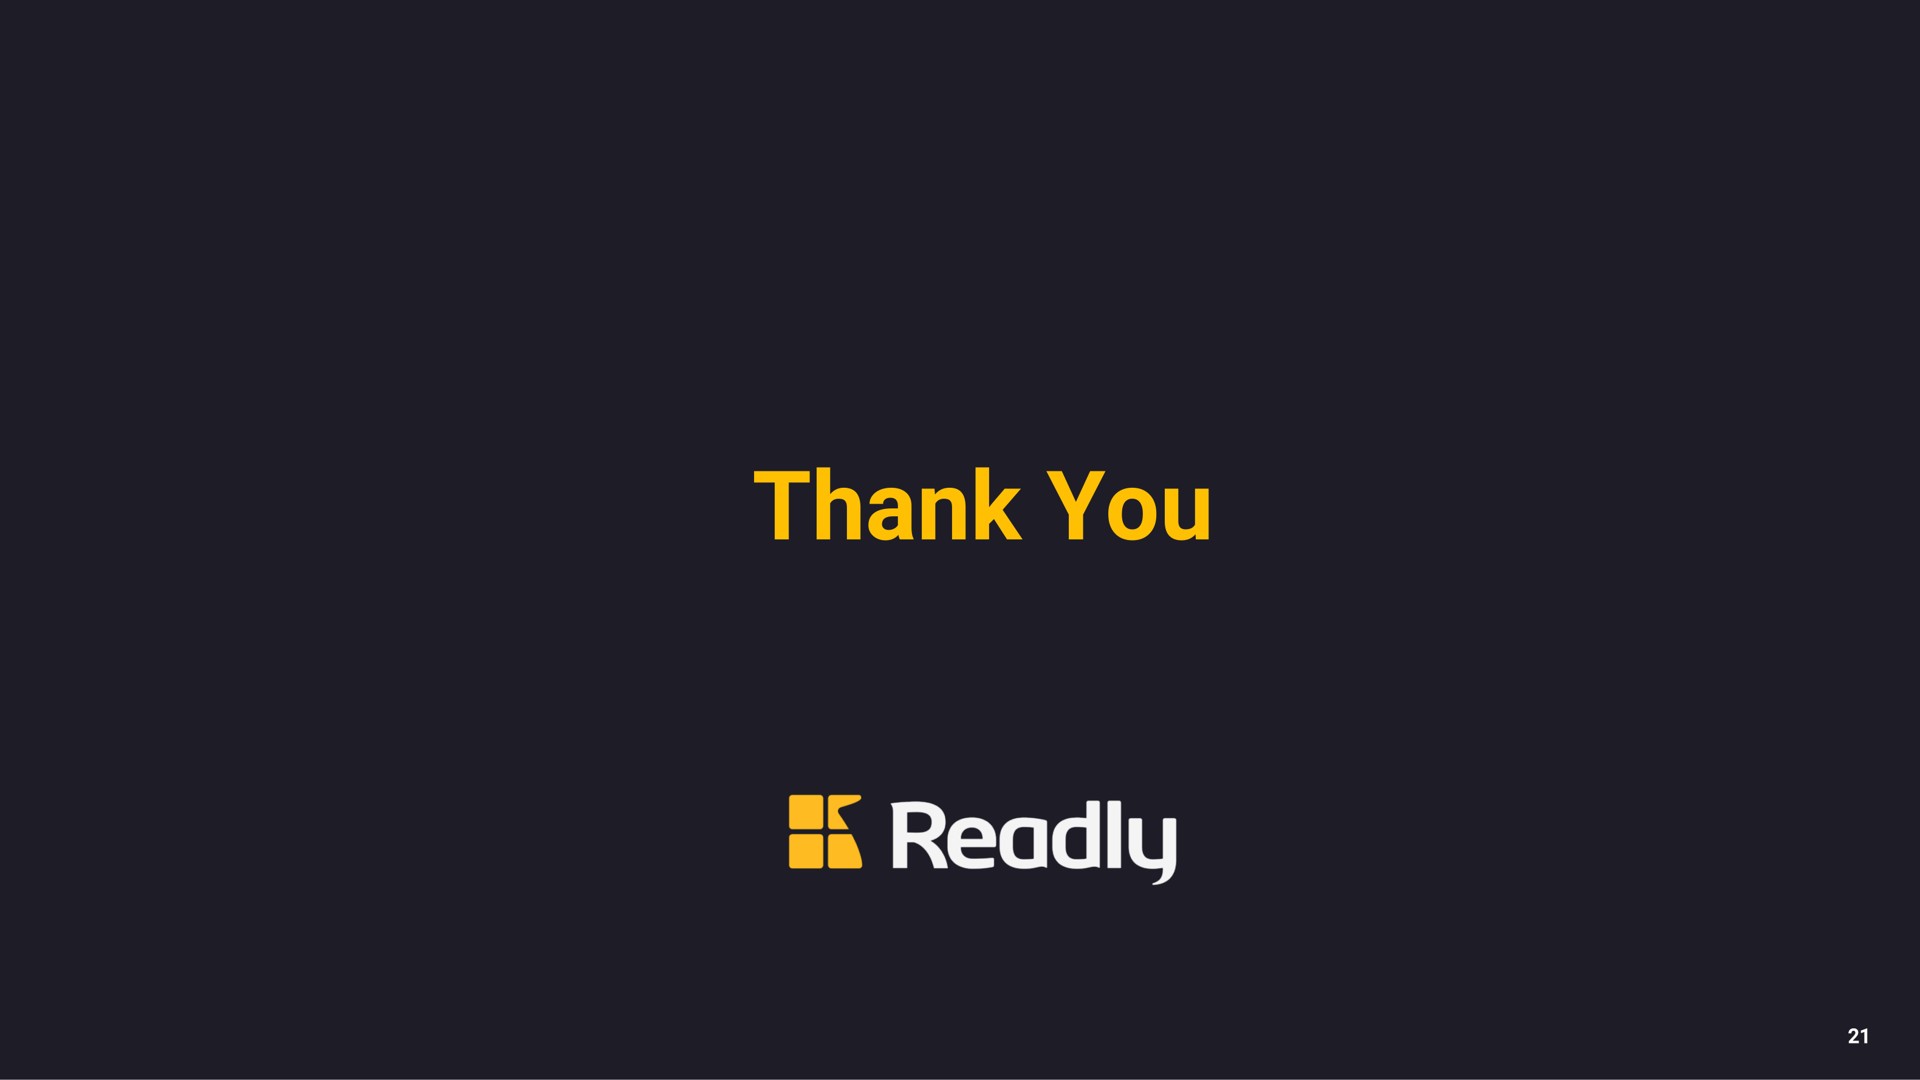 thank you readily | Readly